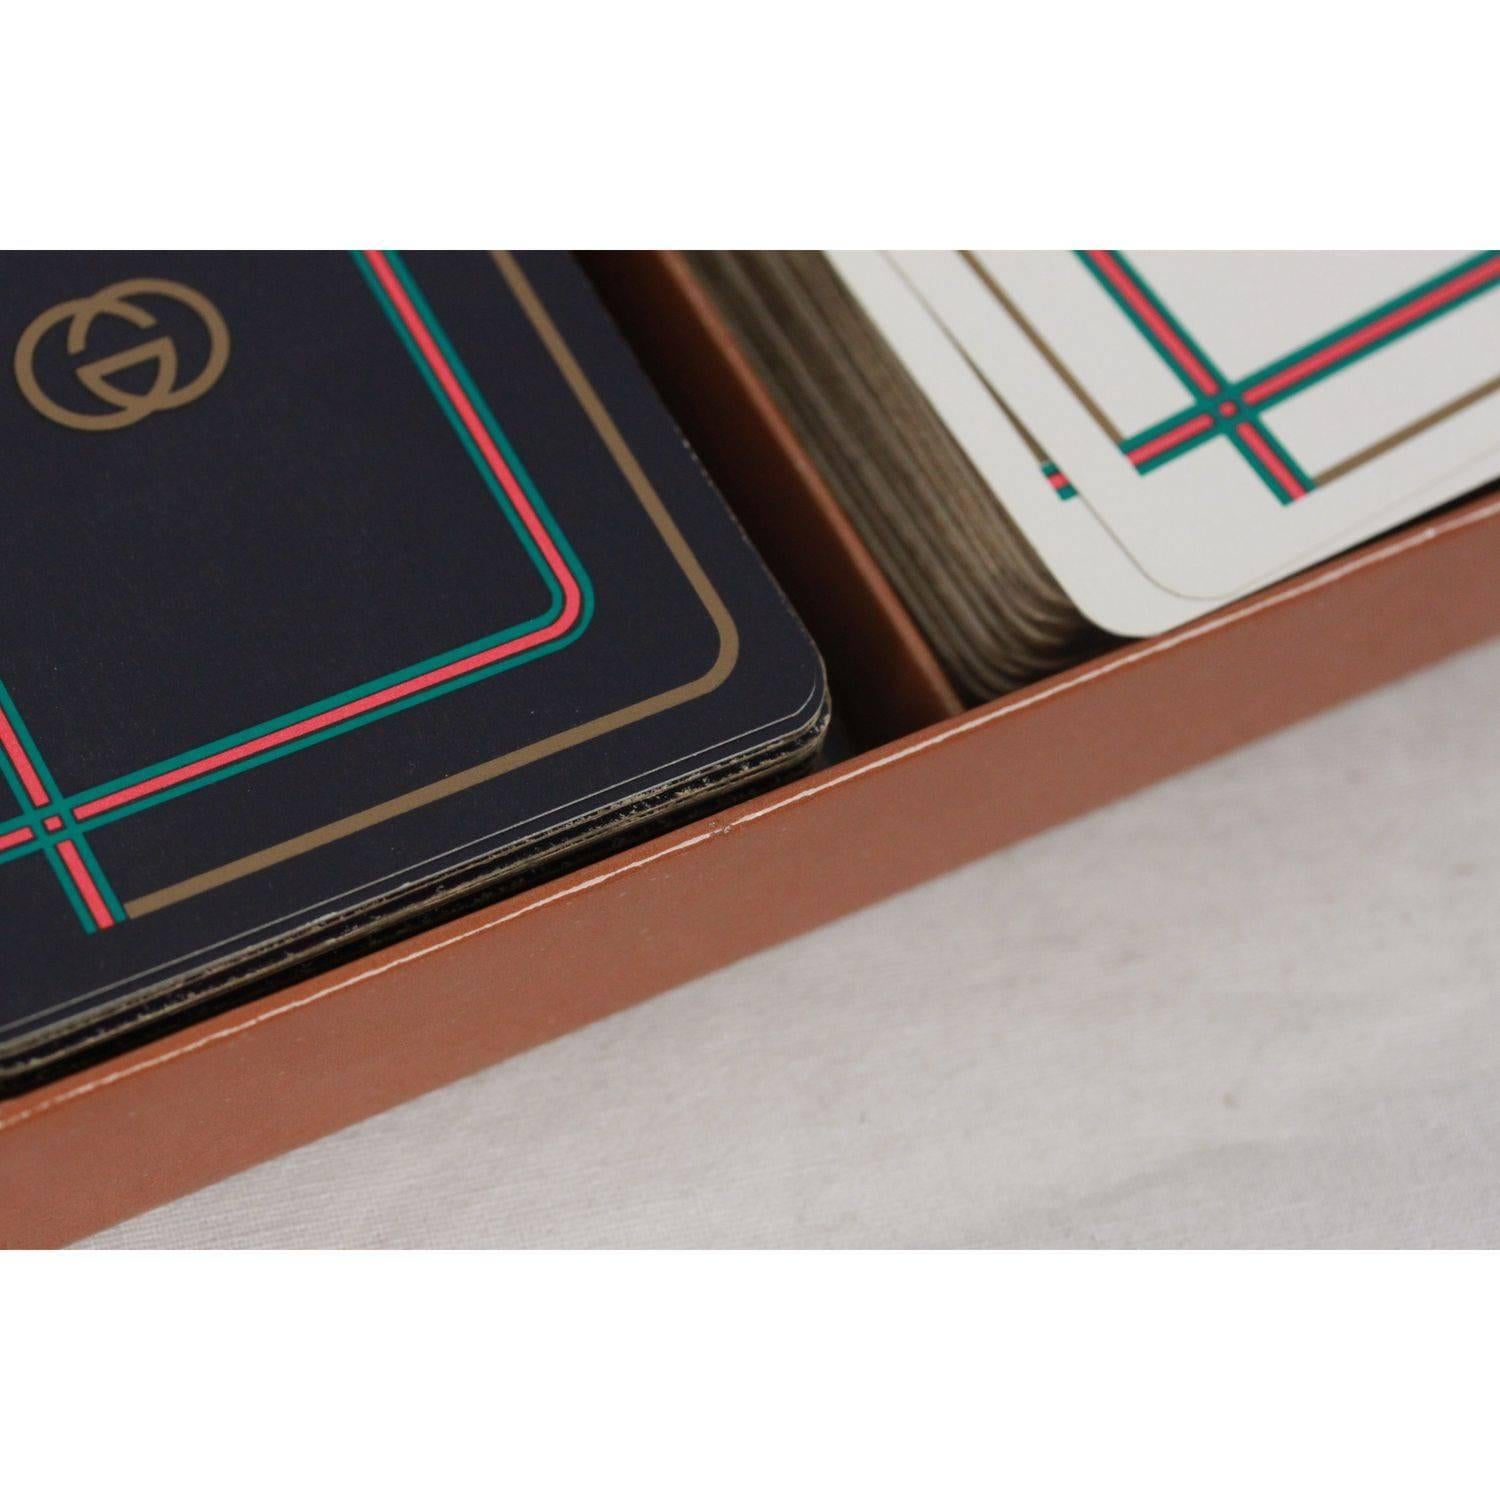 - Very nice & unique GUCCI vintage boxed set of French playing cards
- 3 Decks in 3 different color (Blue, White, Red)
- GG - GUCCI logo on the back of every card
- Each deck has 52 cards, 2 jokers, a score card, plus an insert card.
- The cards are